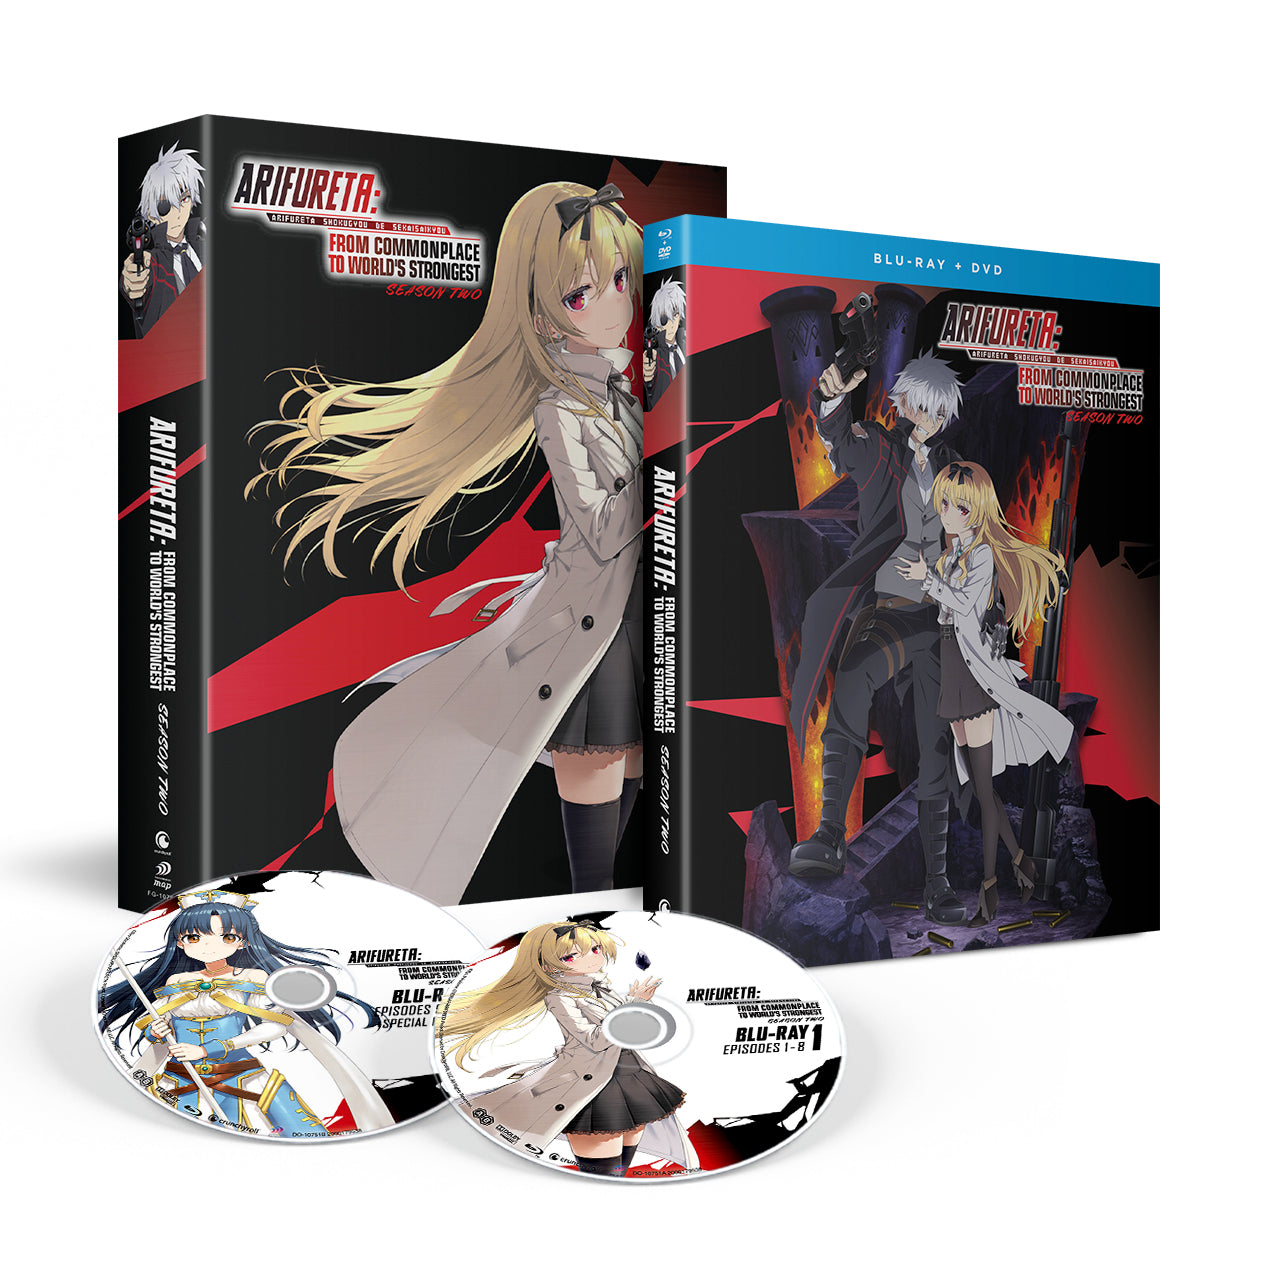 Arifureta: From Commonplace to World's Strongest - Season 2 - BD/DVD - LE image count 1